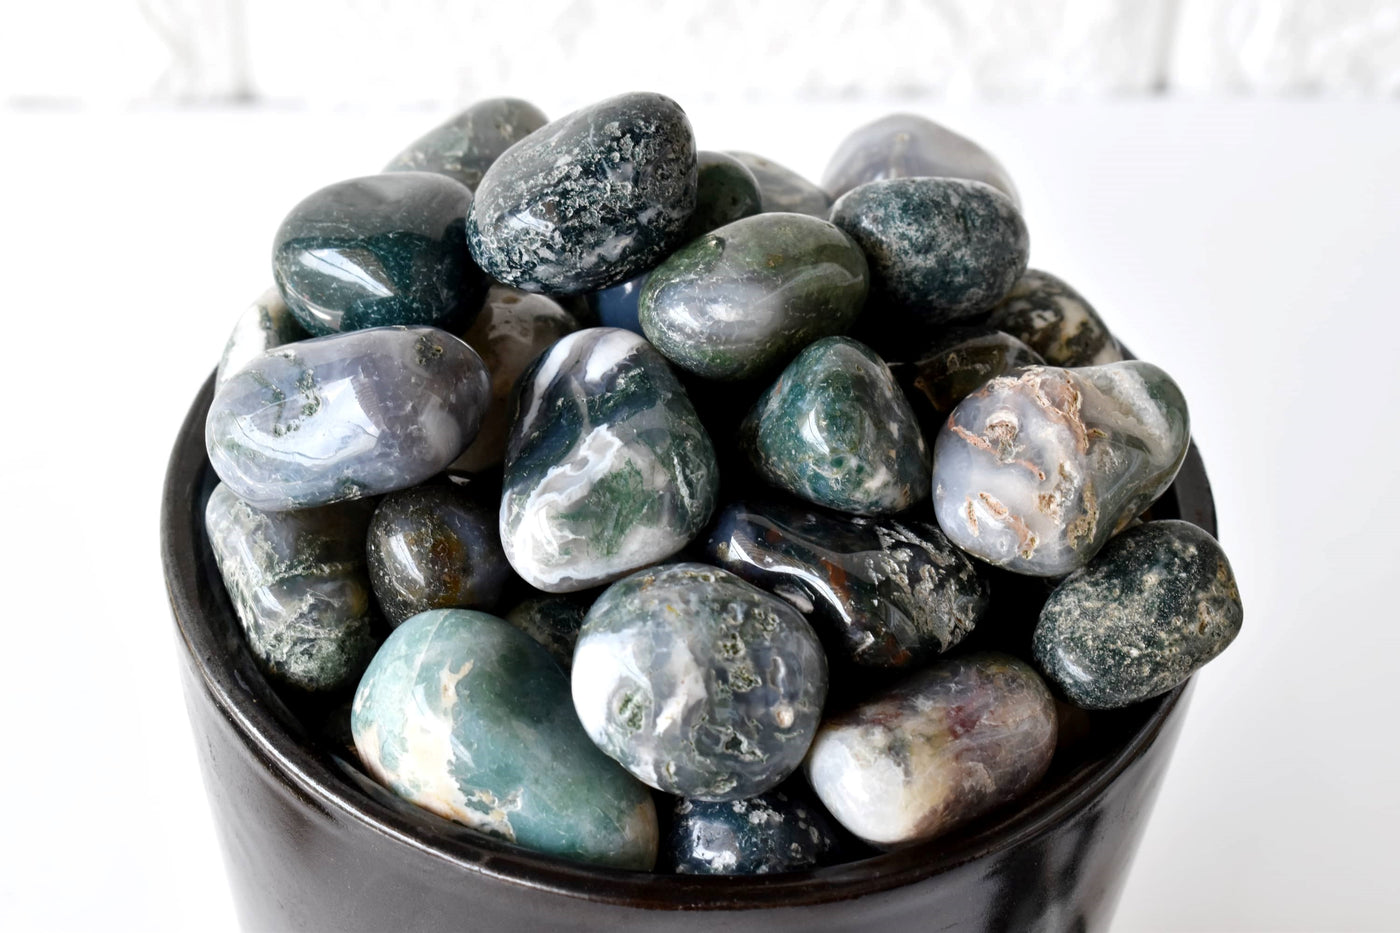 Moss Agate Tumbled Crystals (Generosity and Resolution)